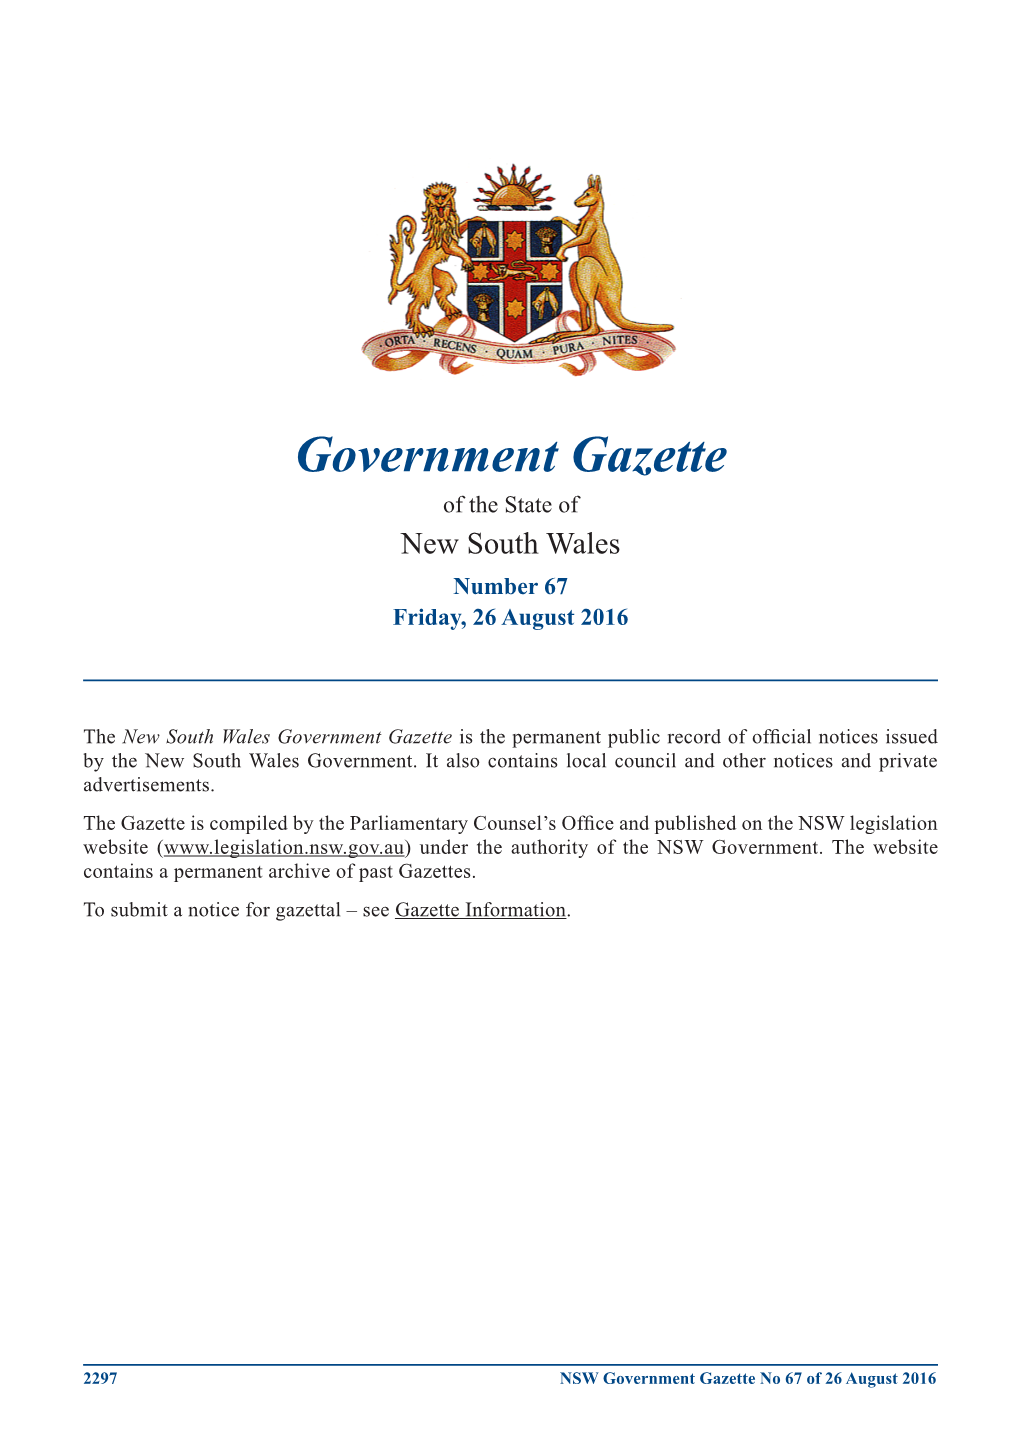 Government Gazette No 67 of 26 August 2016 Government Notices GOVERNMENT NOTICES Appointments